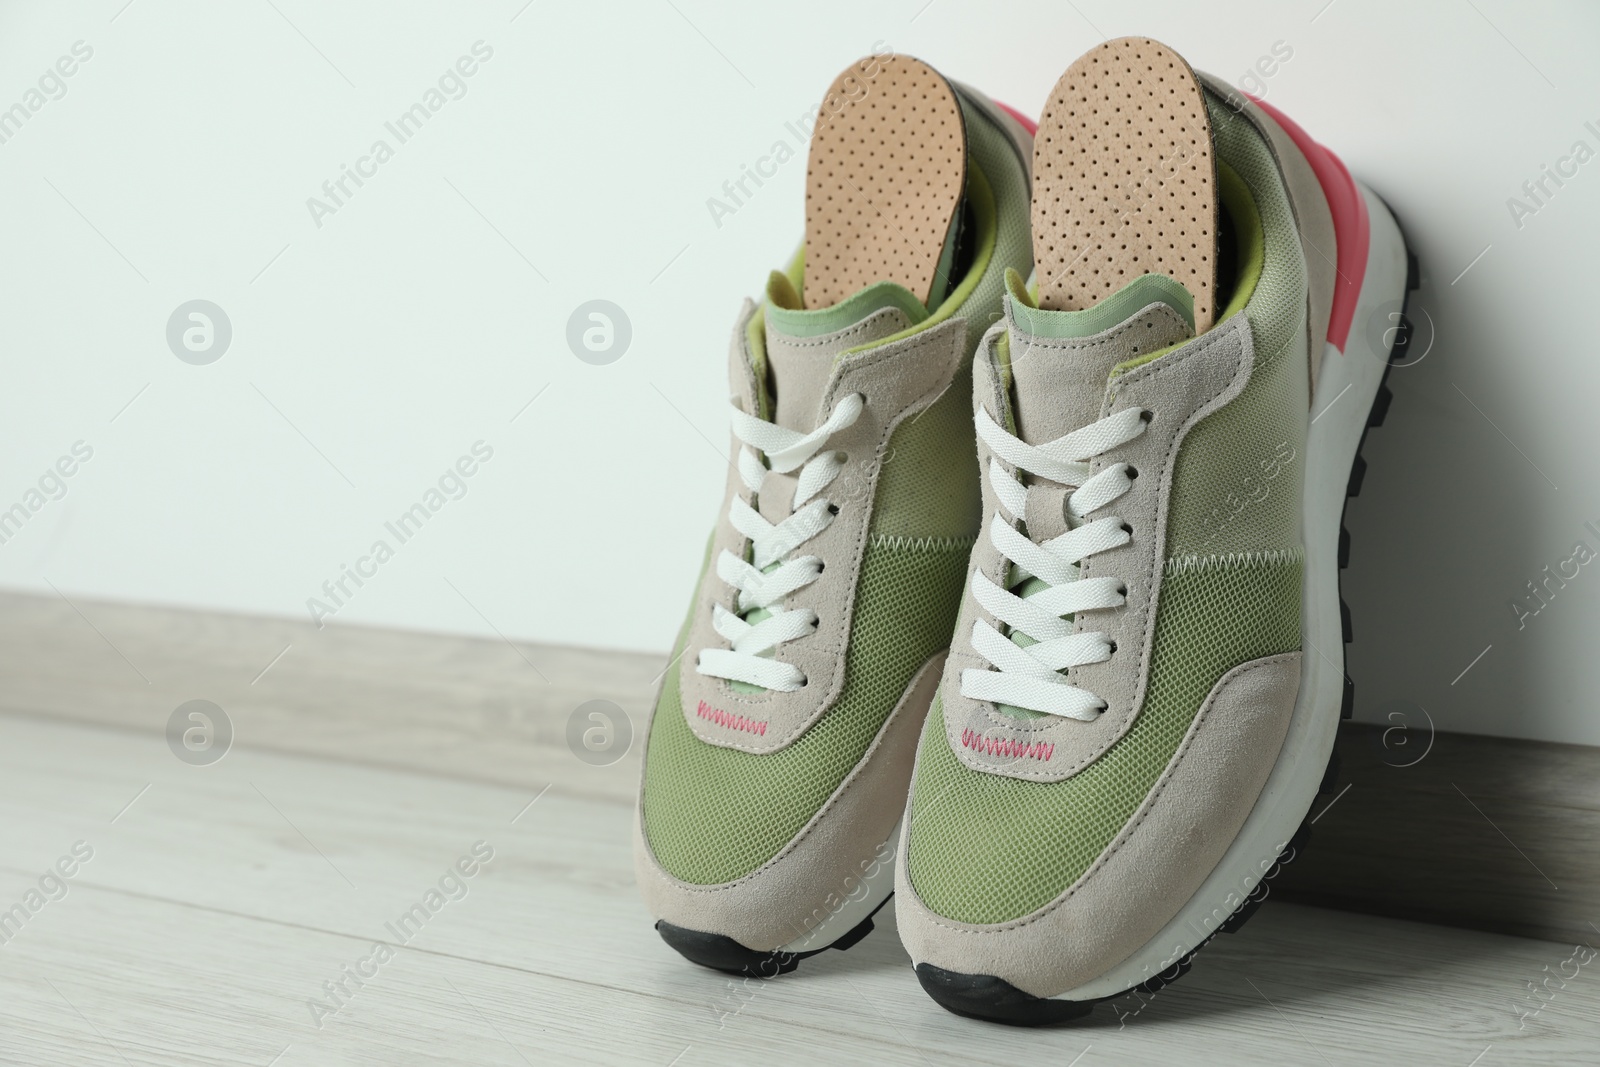 Photo of Orthopedic insoles in shoes on floor, closeup. Space for text